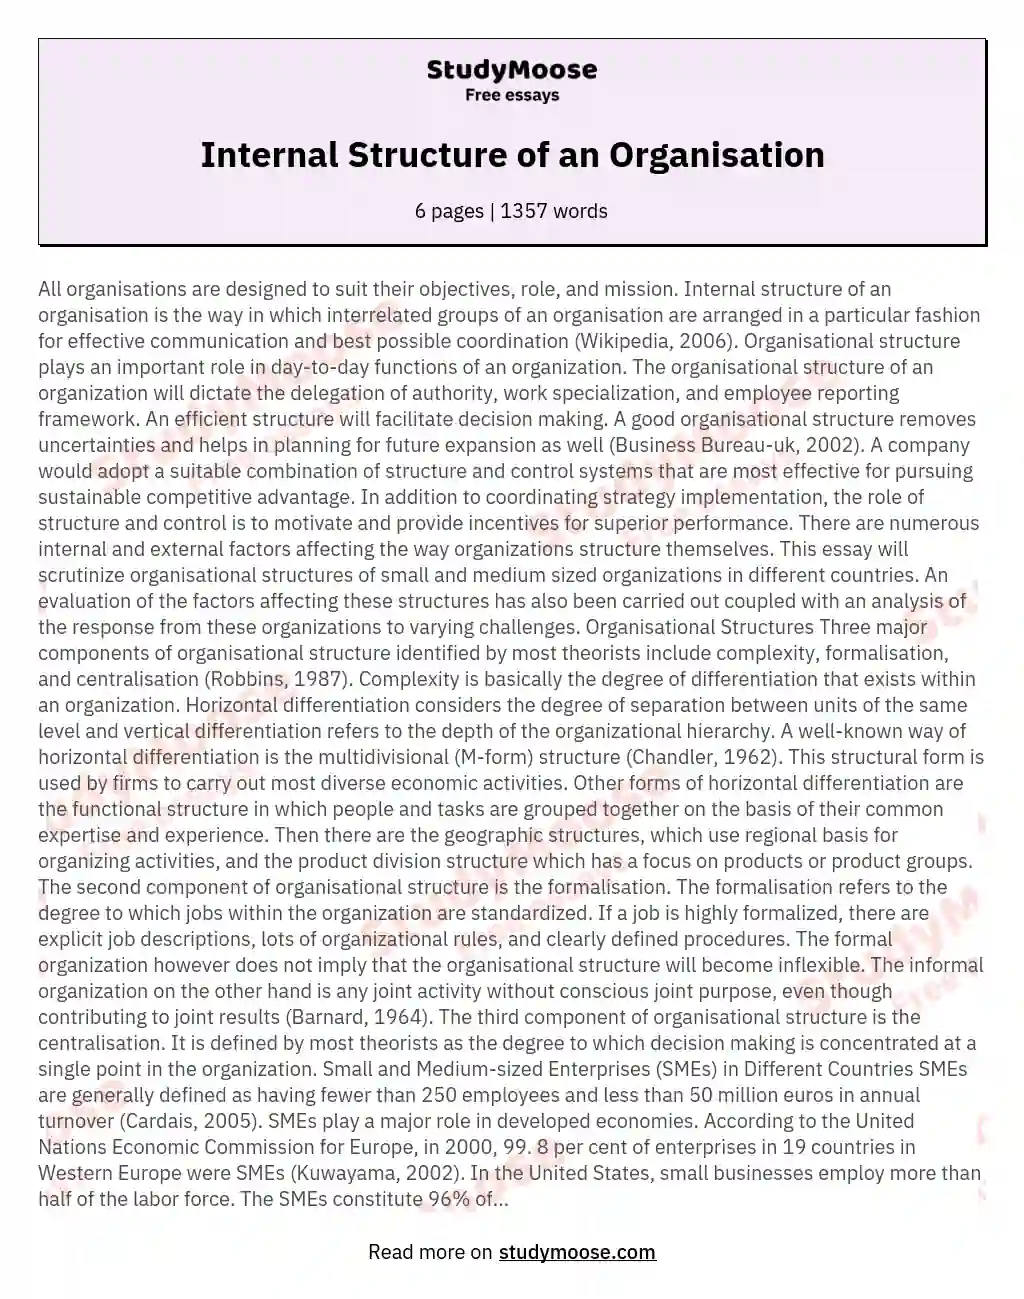 an essay on organizational structure